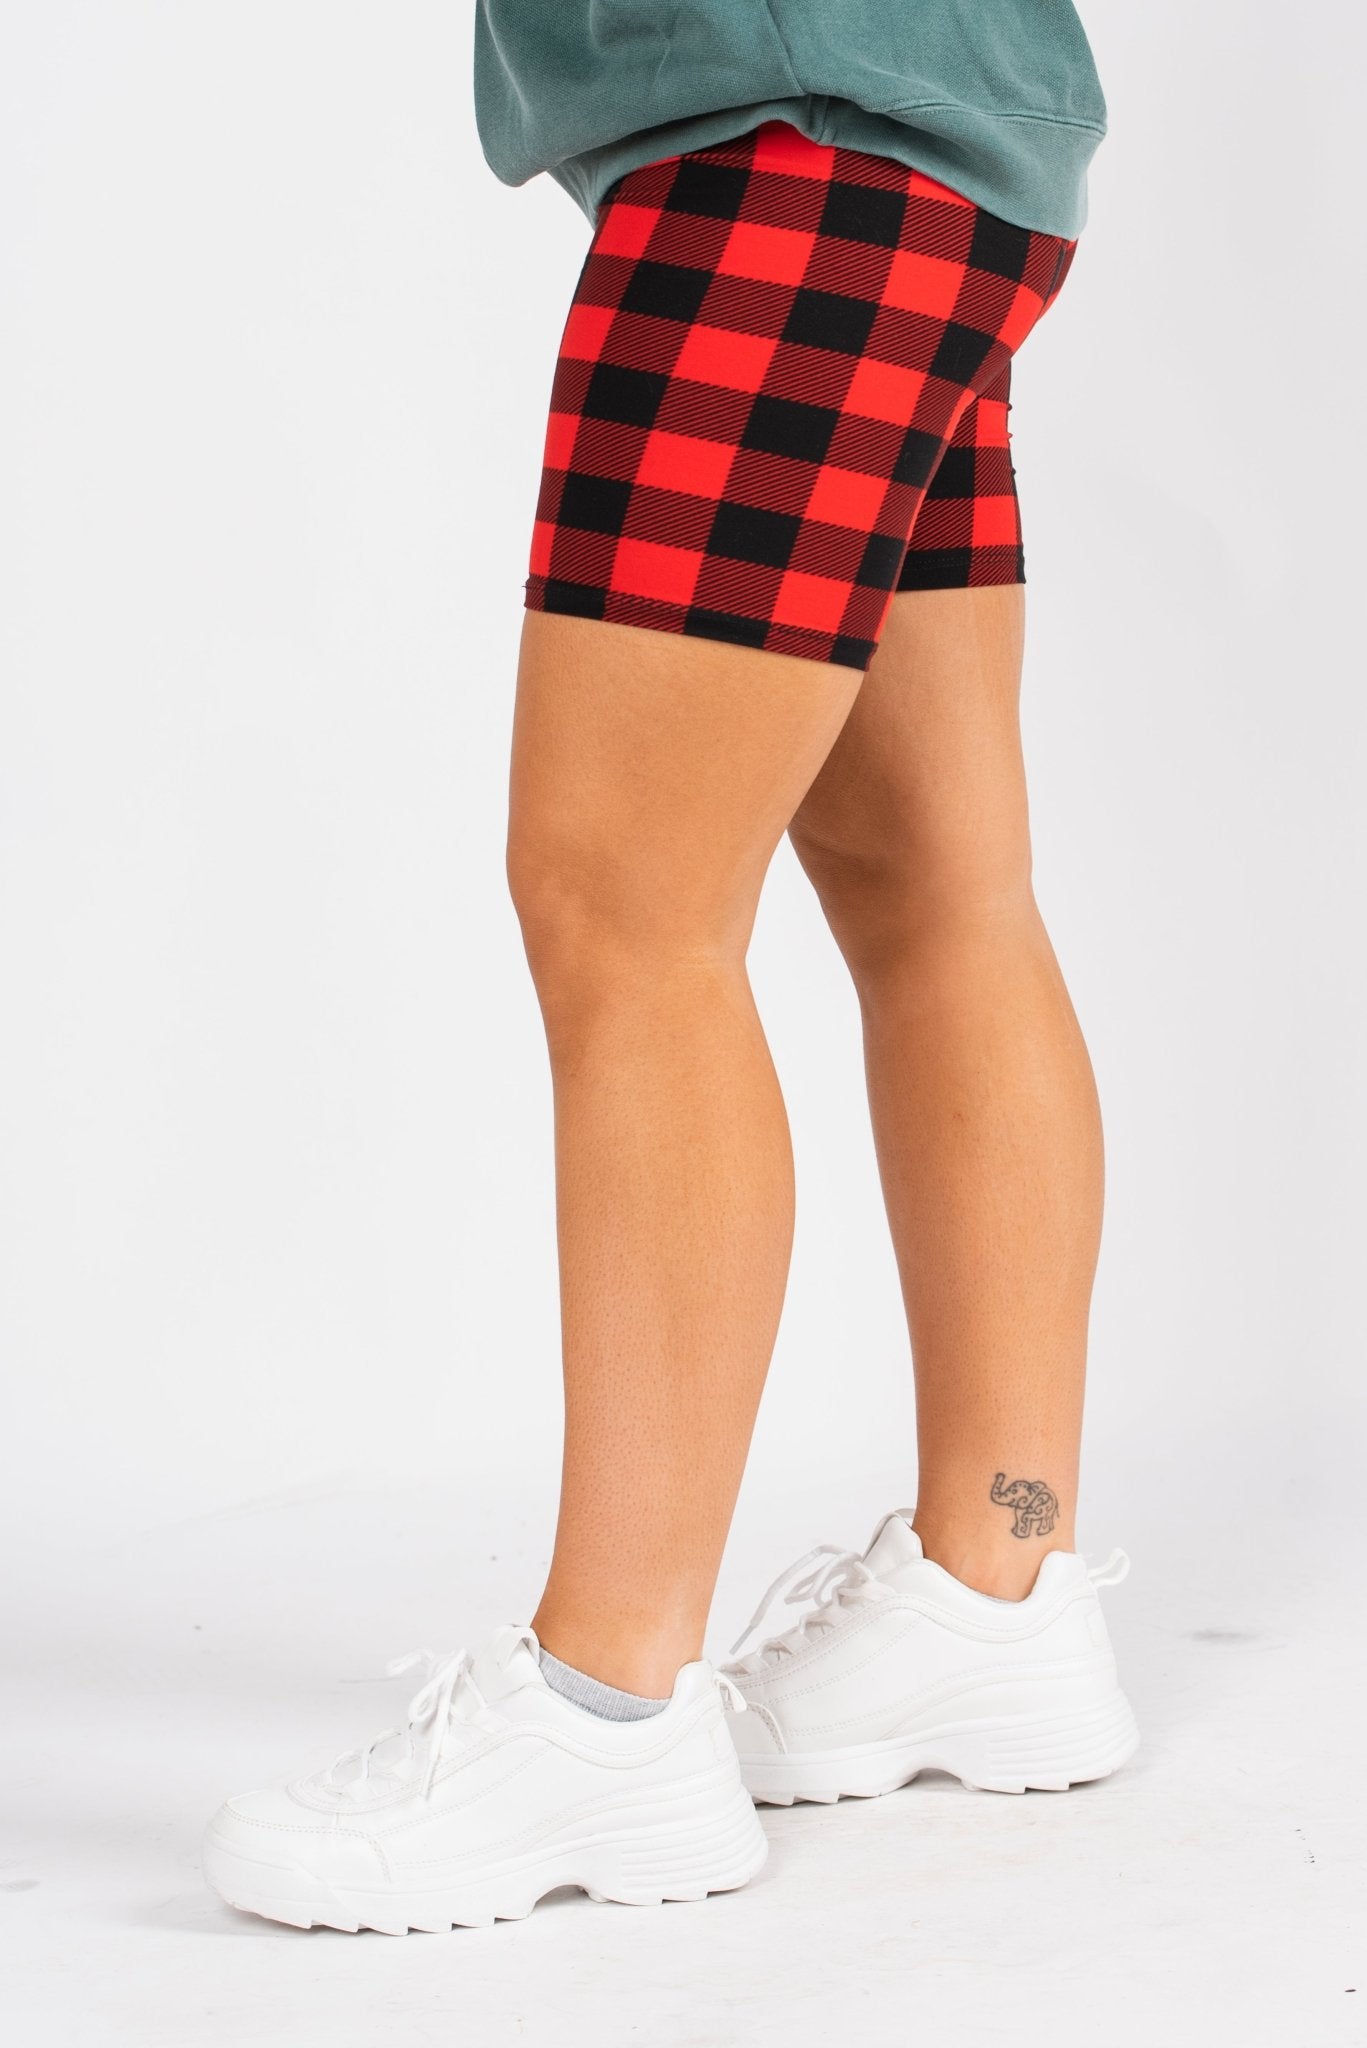 Gingham printed biker shorts red/black - Exclusive Collection of Holiday Inspired T-Shirts and Hoodies at Lush Fashion Lounge Boutique in Oklahoma City